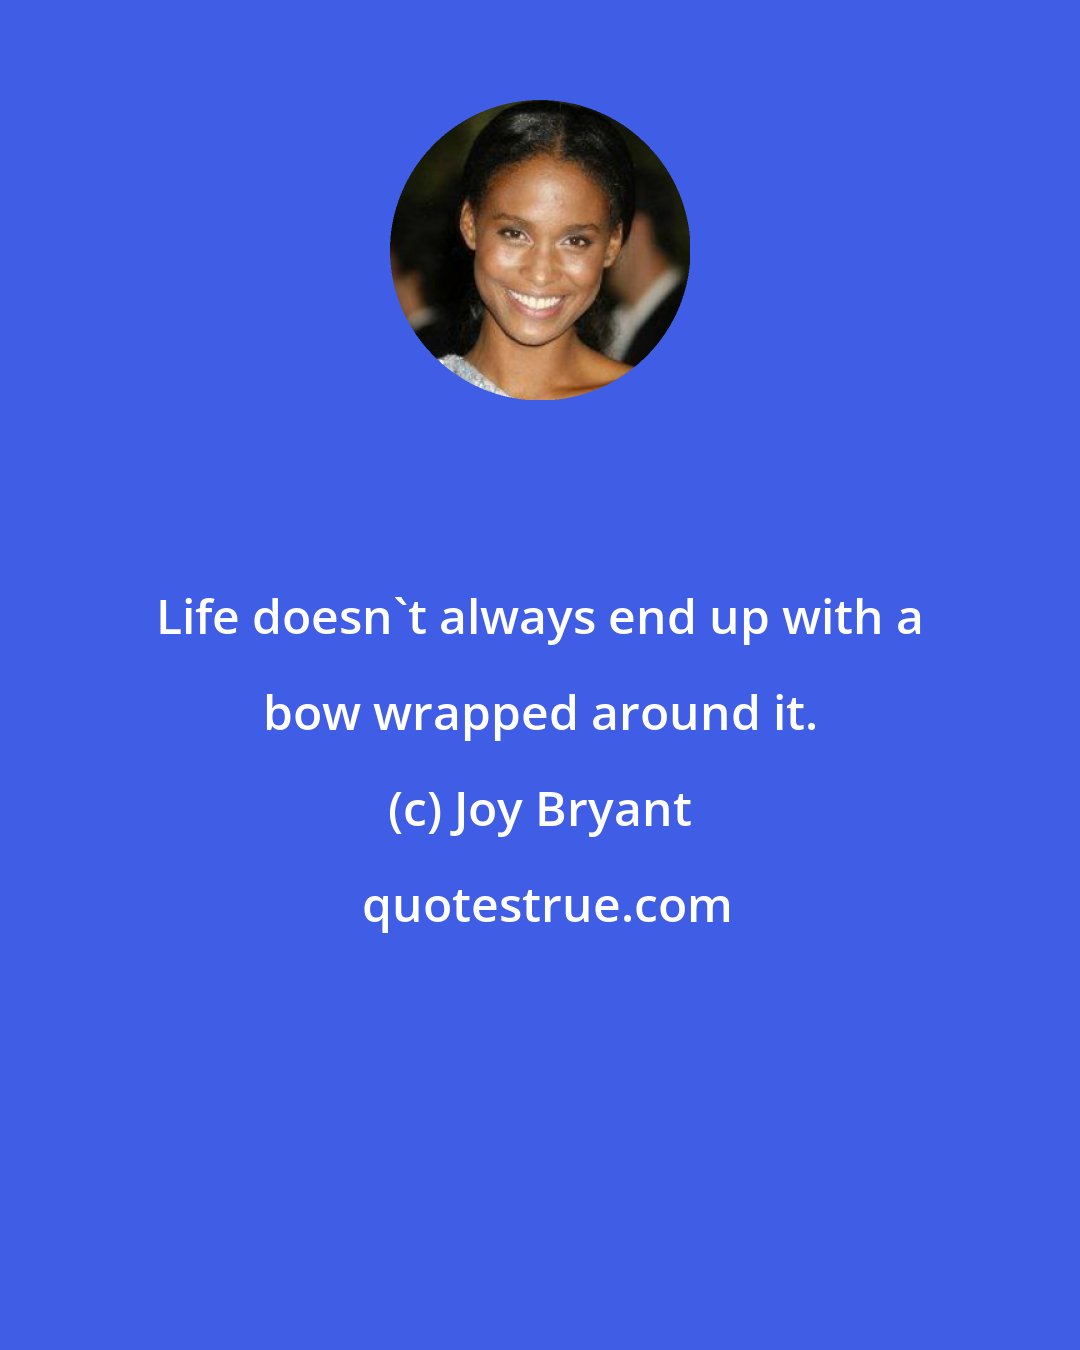 Joy Bryant: Life doesn't always end up with a bow wrapped around it.